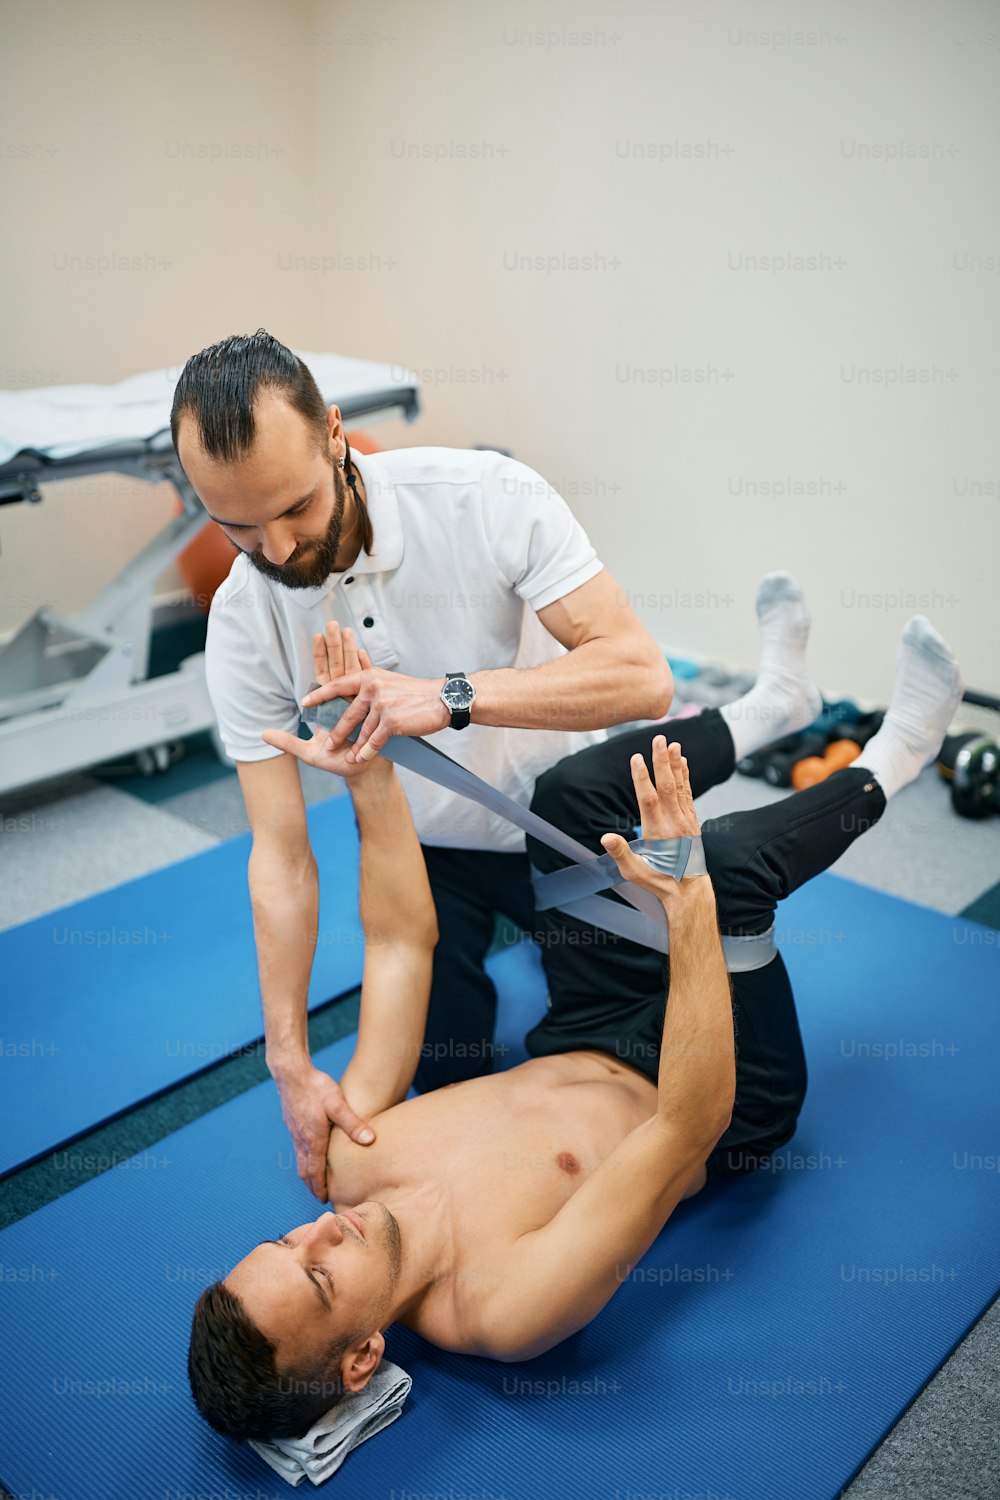 Physical therapist assisting male patient with using power band during the therapy at rehabilitation center.